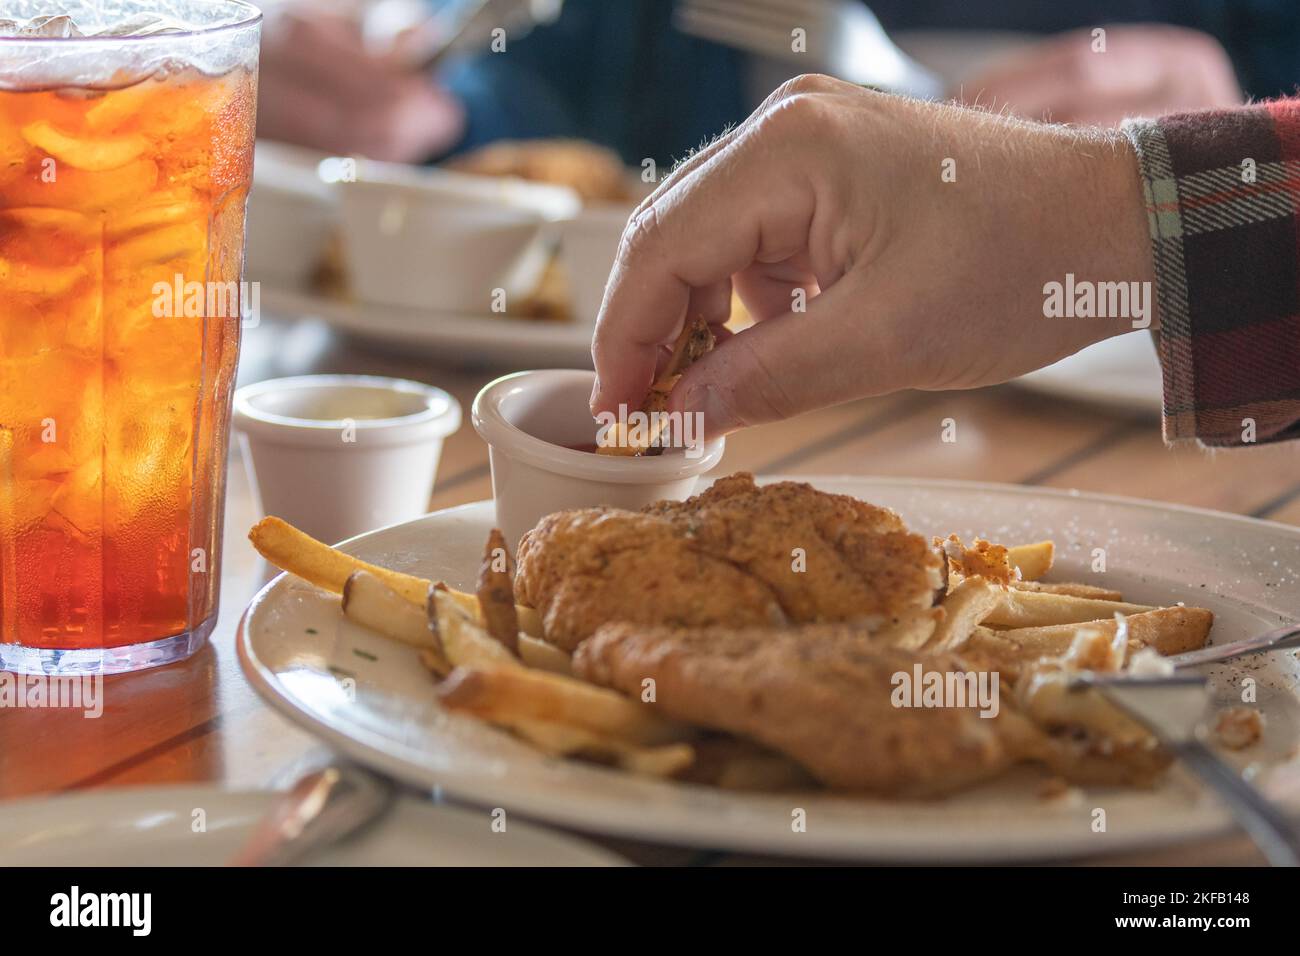 A glass of iced tea and a plate of fried catfish and french fries. Stock Photo